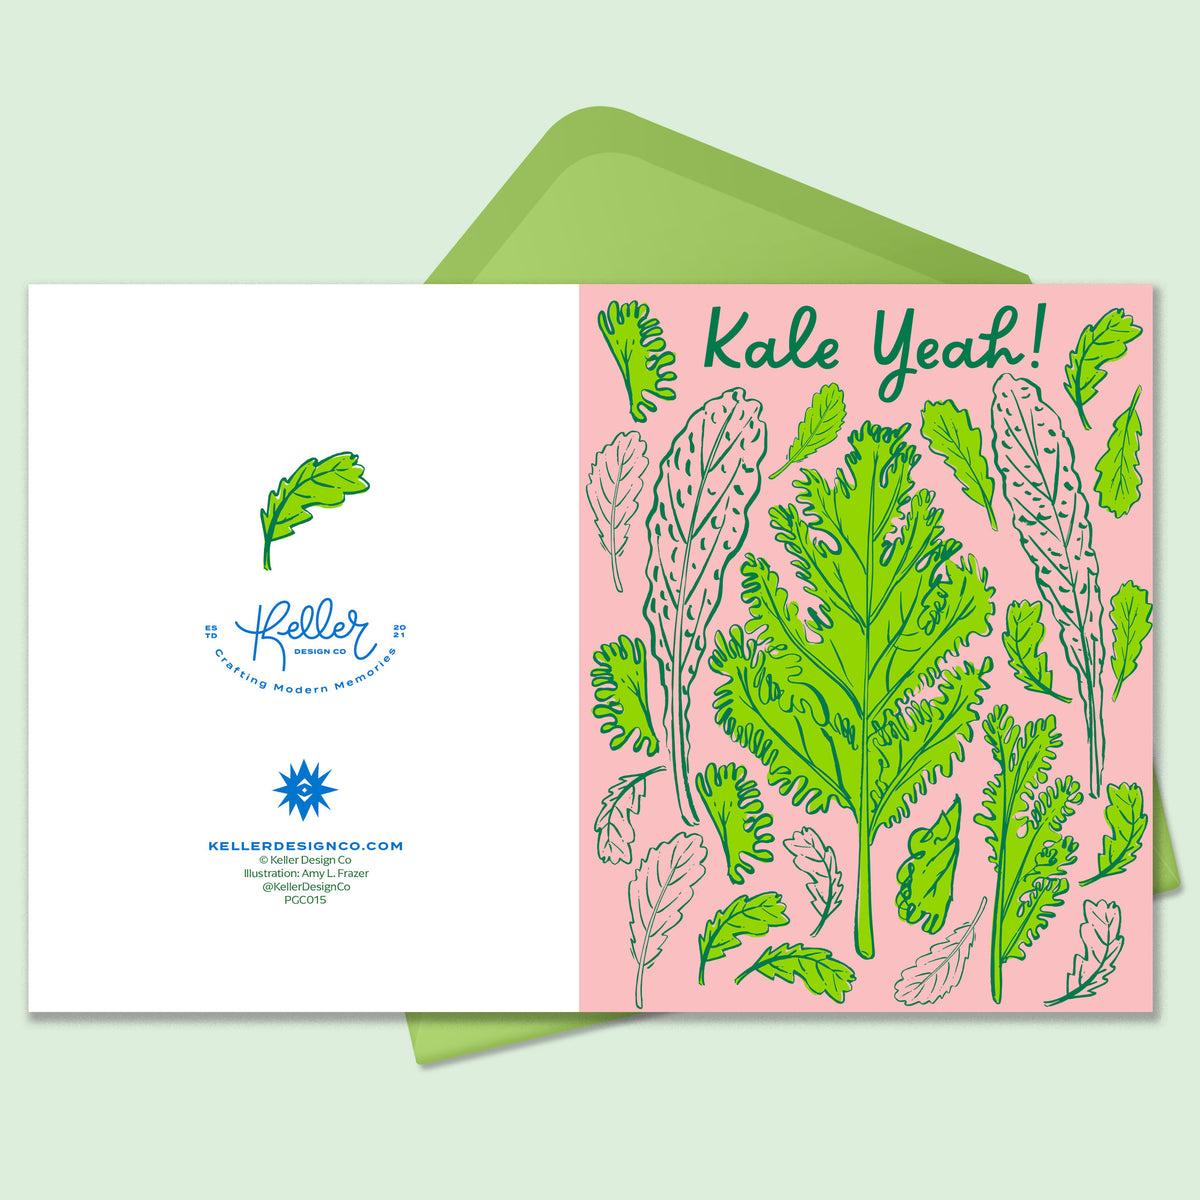 Boxed Set of 8 Cards-Kale Yeah! Greeting Cards